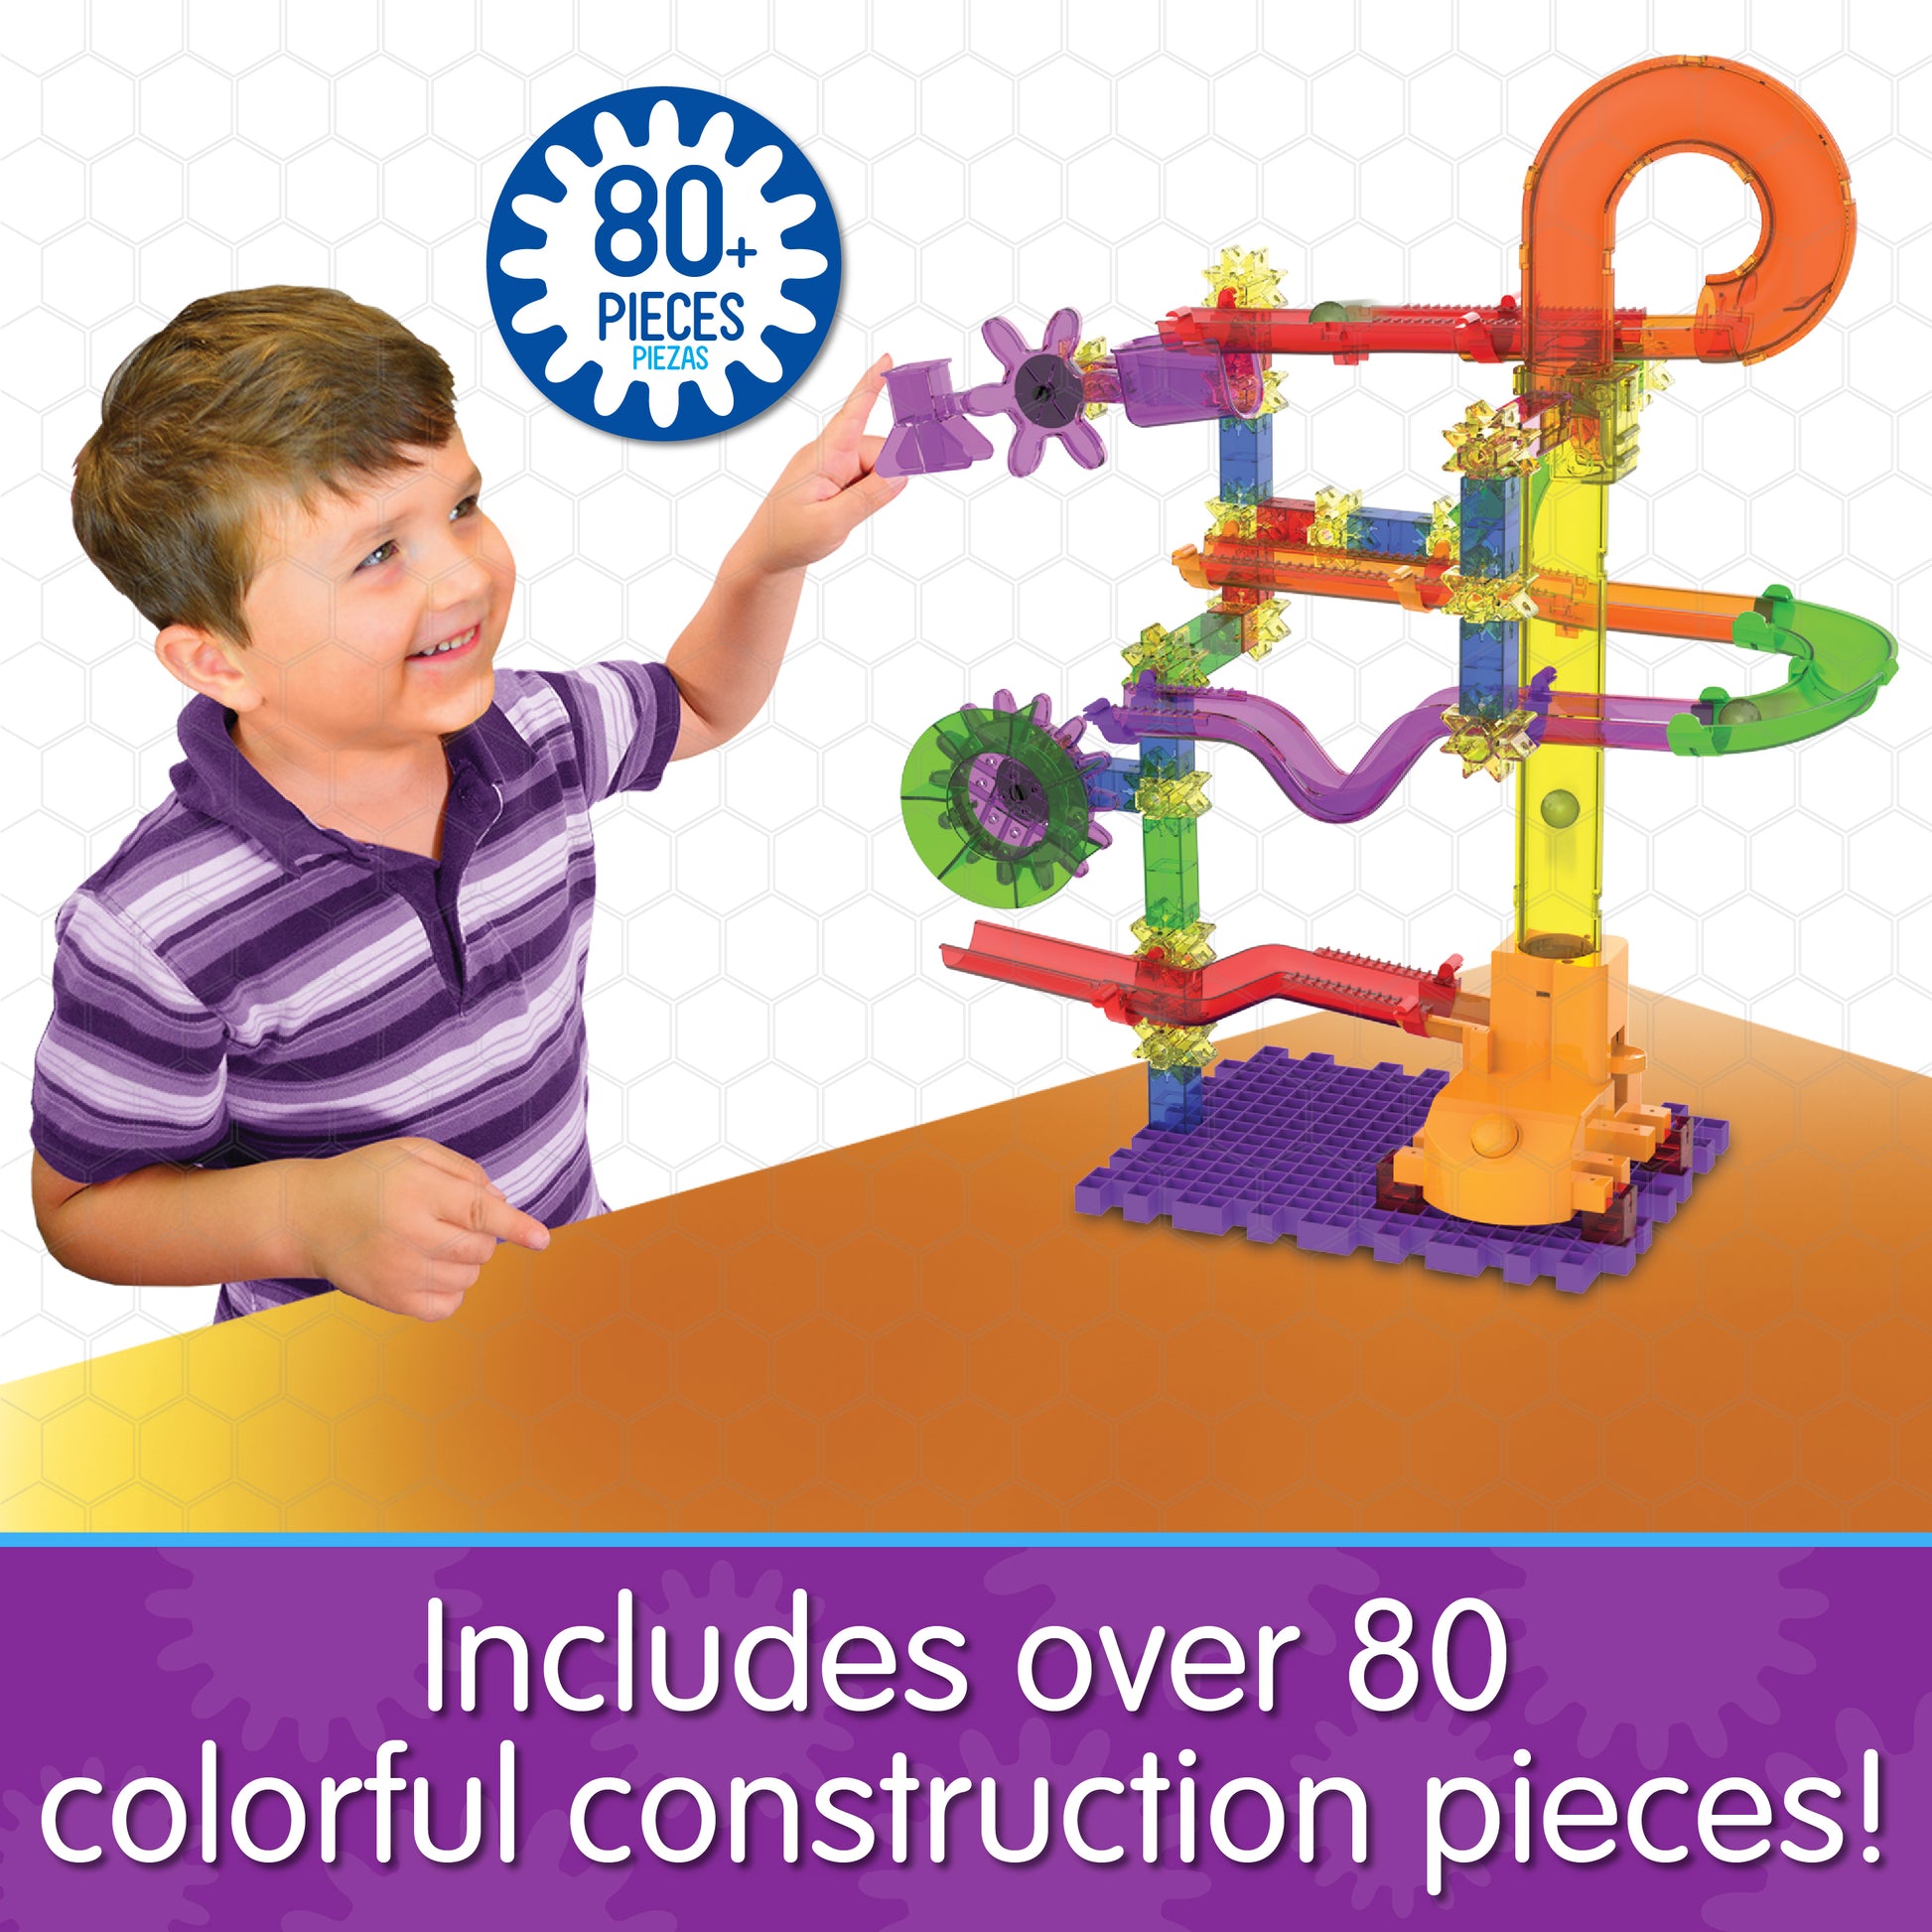 Infographic about Catapult 3.0 that says, "Includes over 80 colorful construction pieces!"